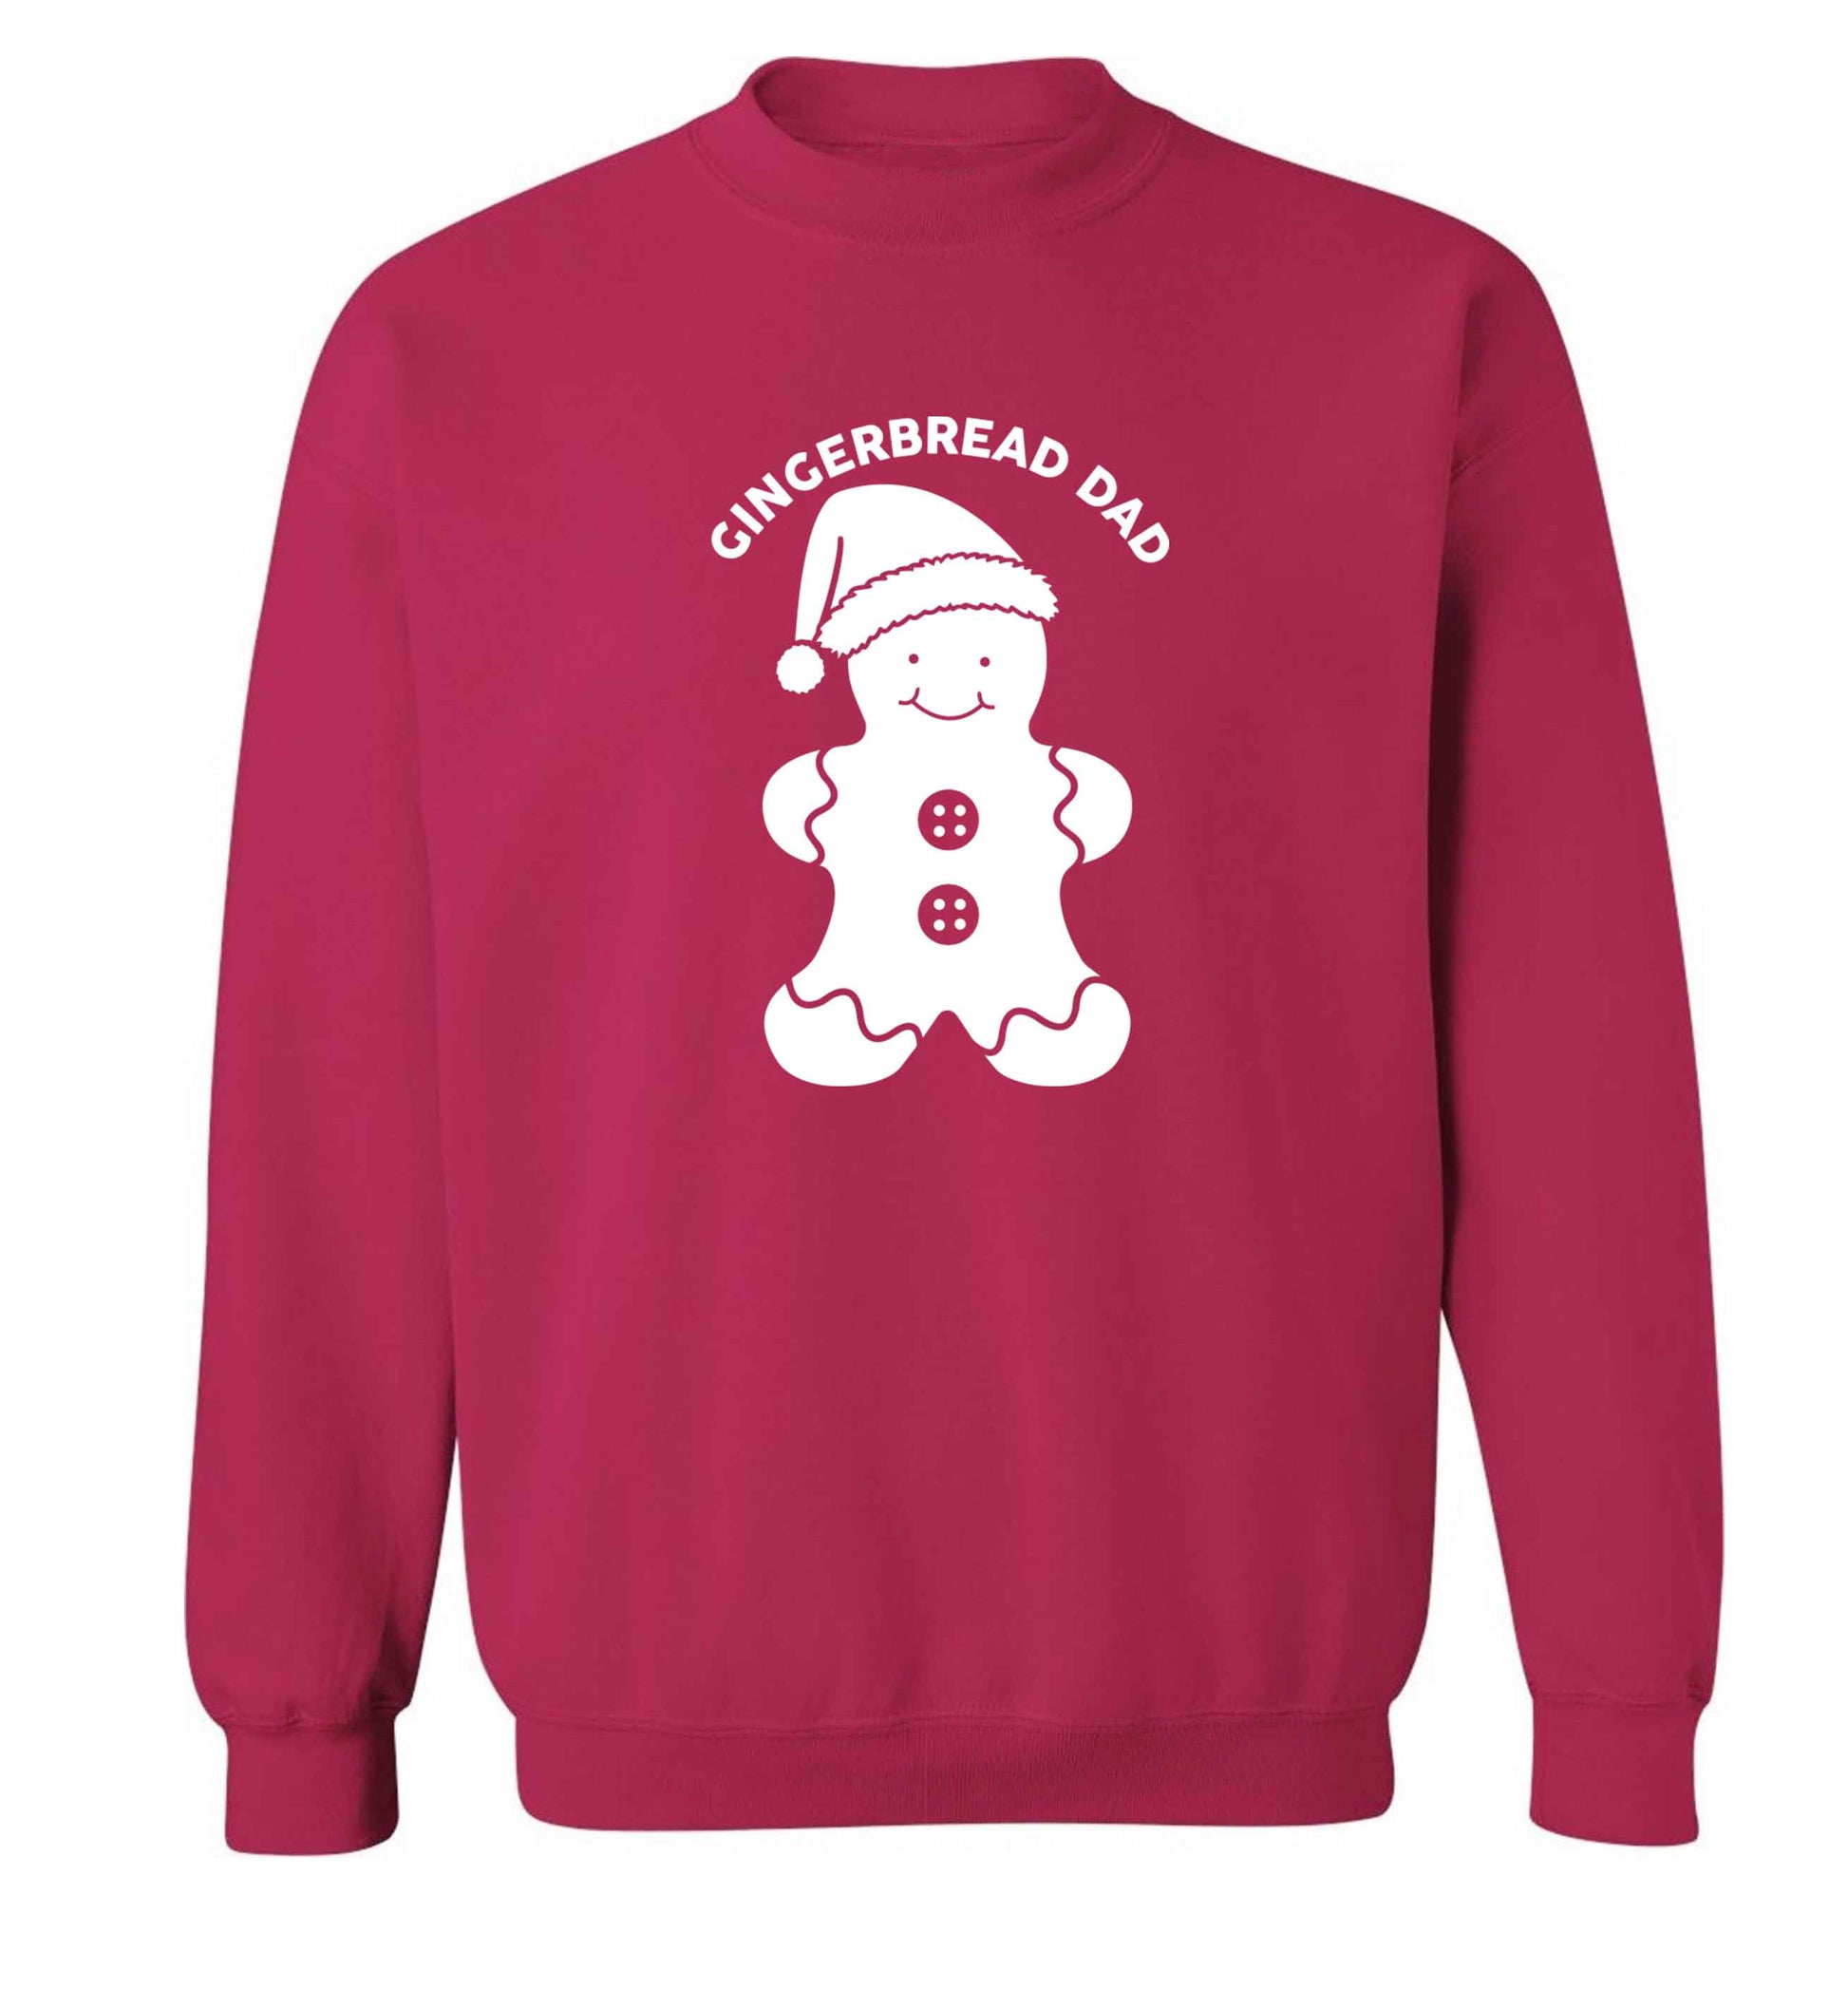 Merry Christmas adult's unisex pink sweater 2XL